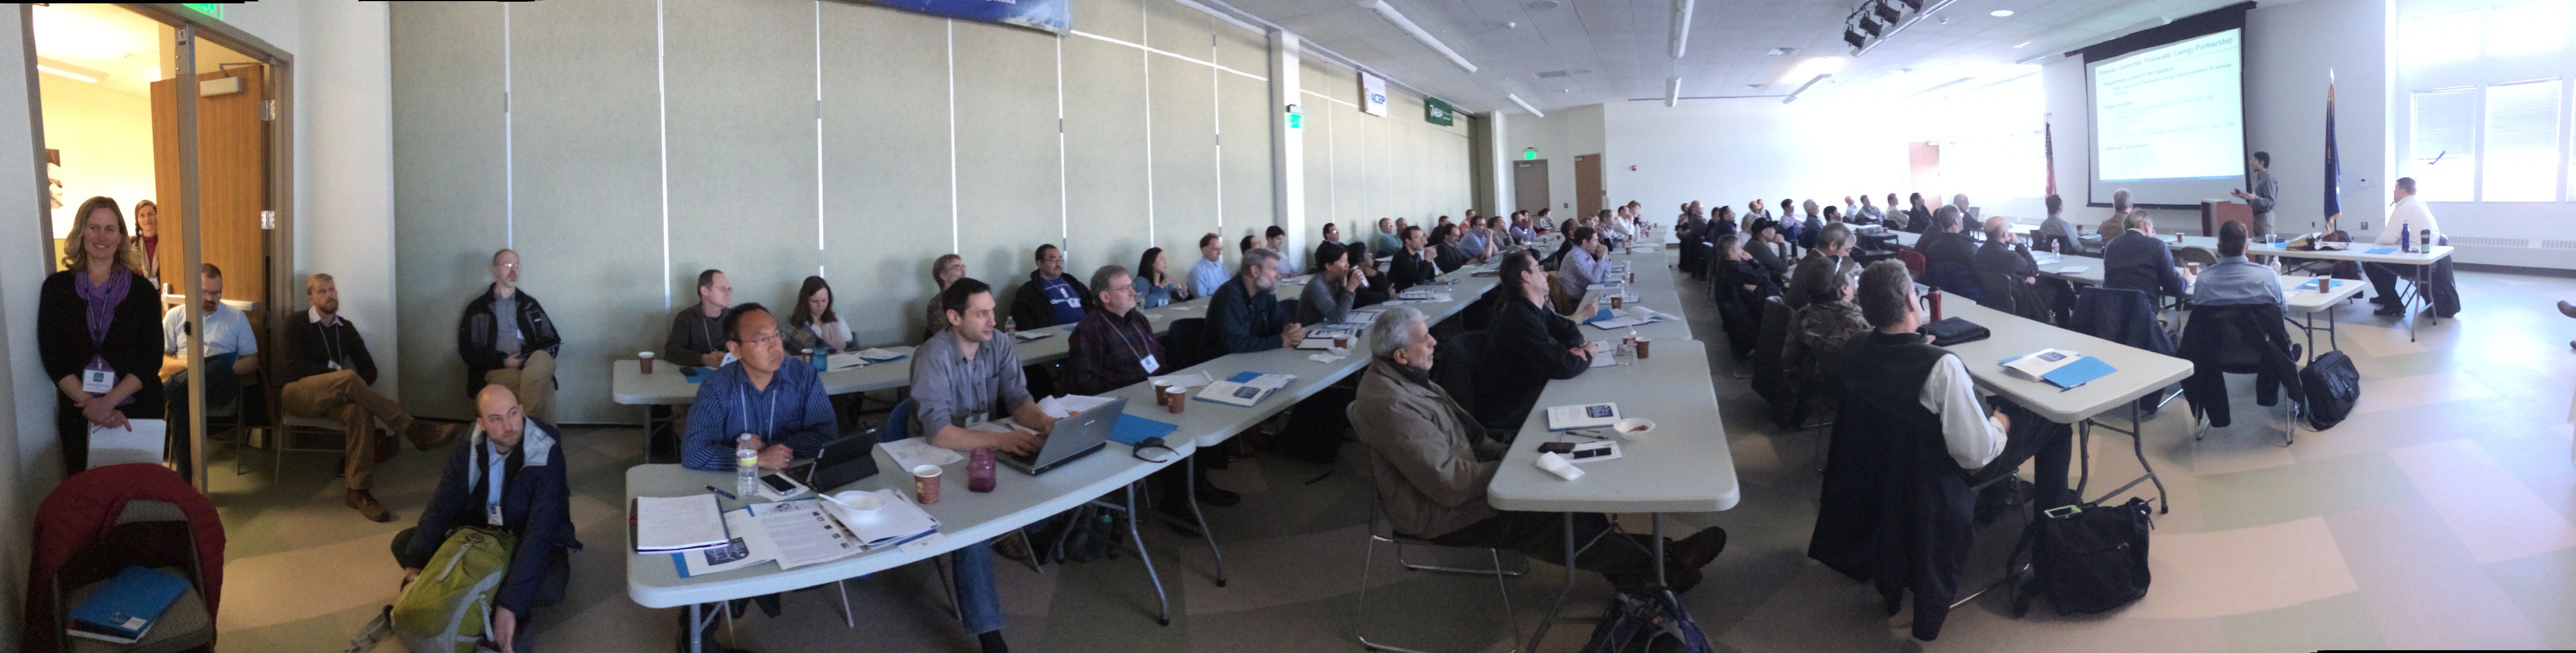 The 2014 Alaska Wind Integration Workshop took place on March 20th and 21st